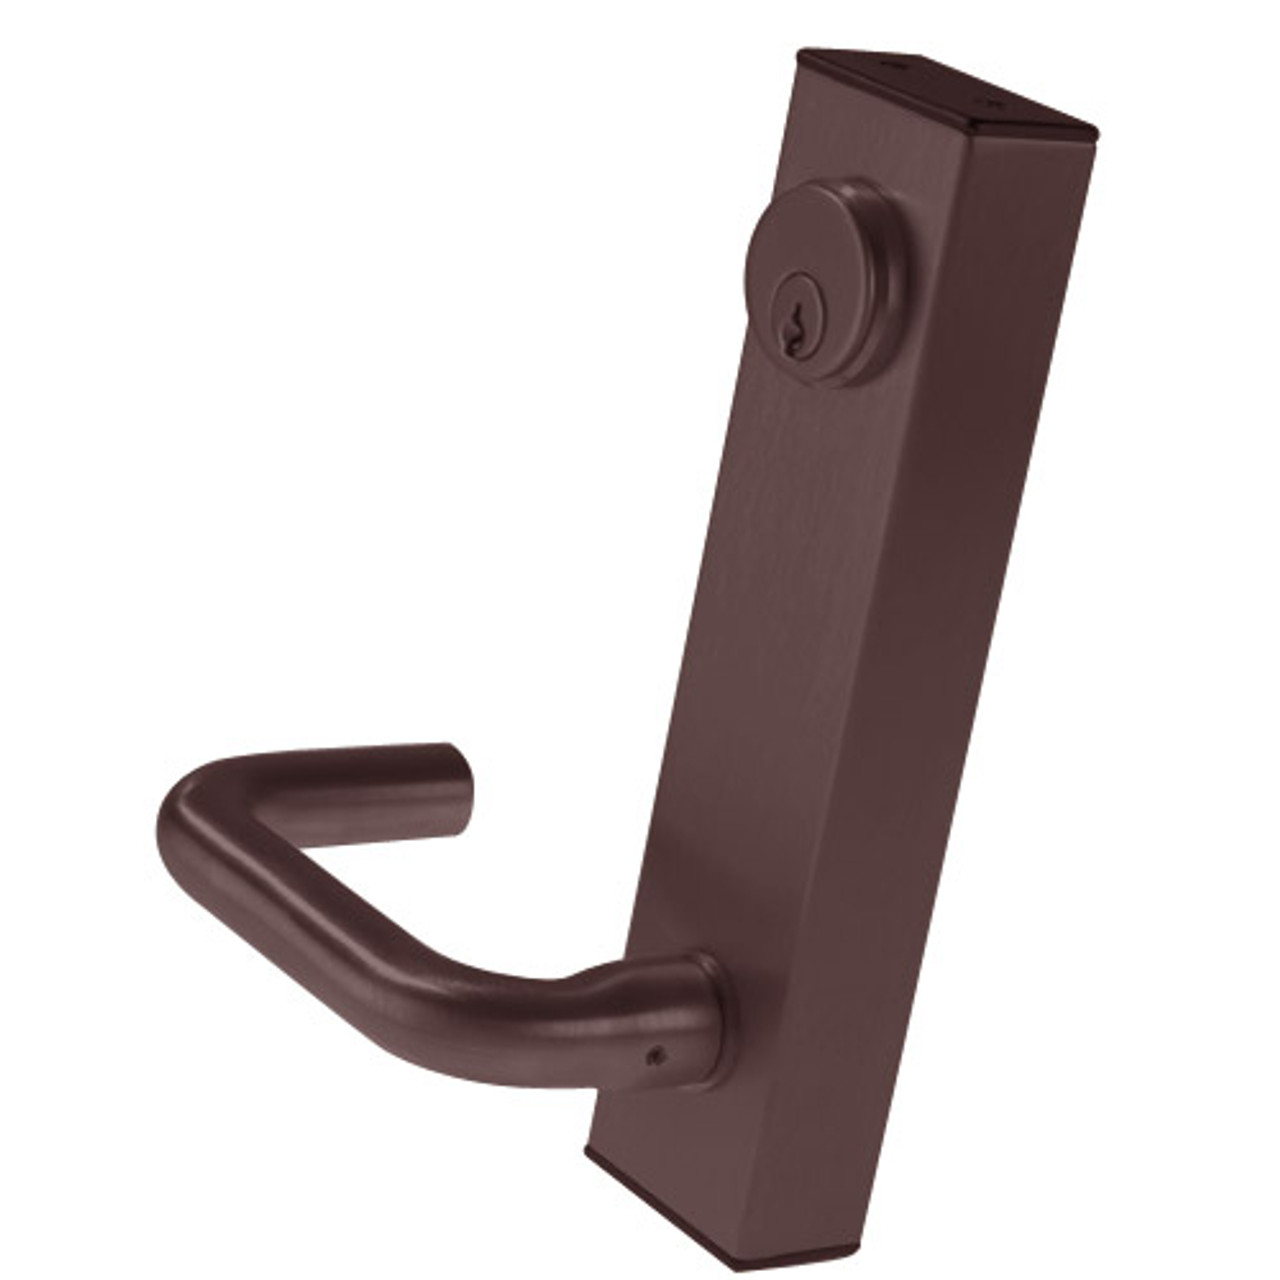 3080-02-0-36-US10B Adams Rite Standard Entry Trim with Round Lever in Oil Rubbed Bronze Finish